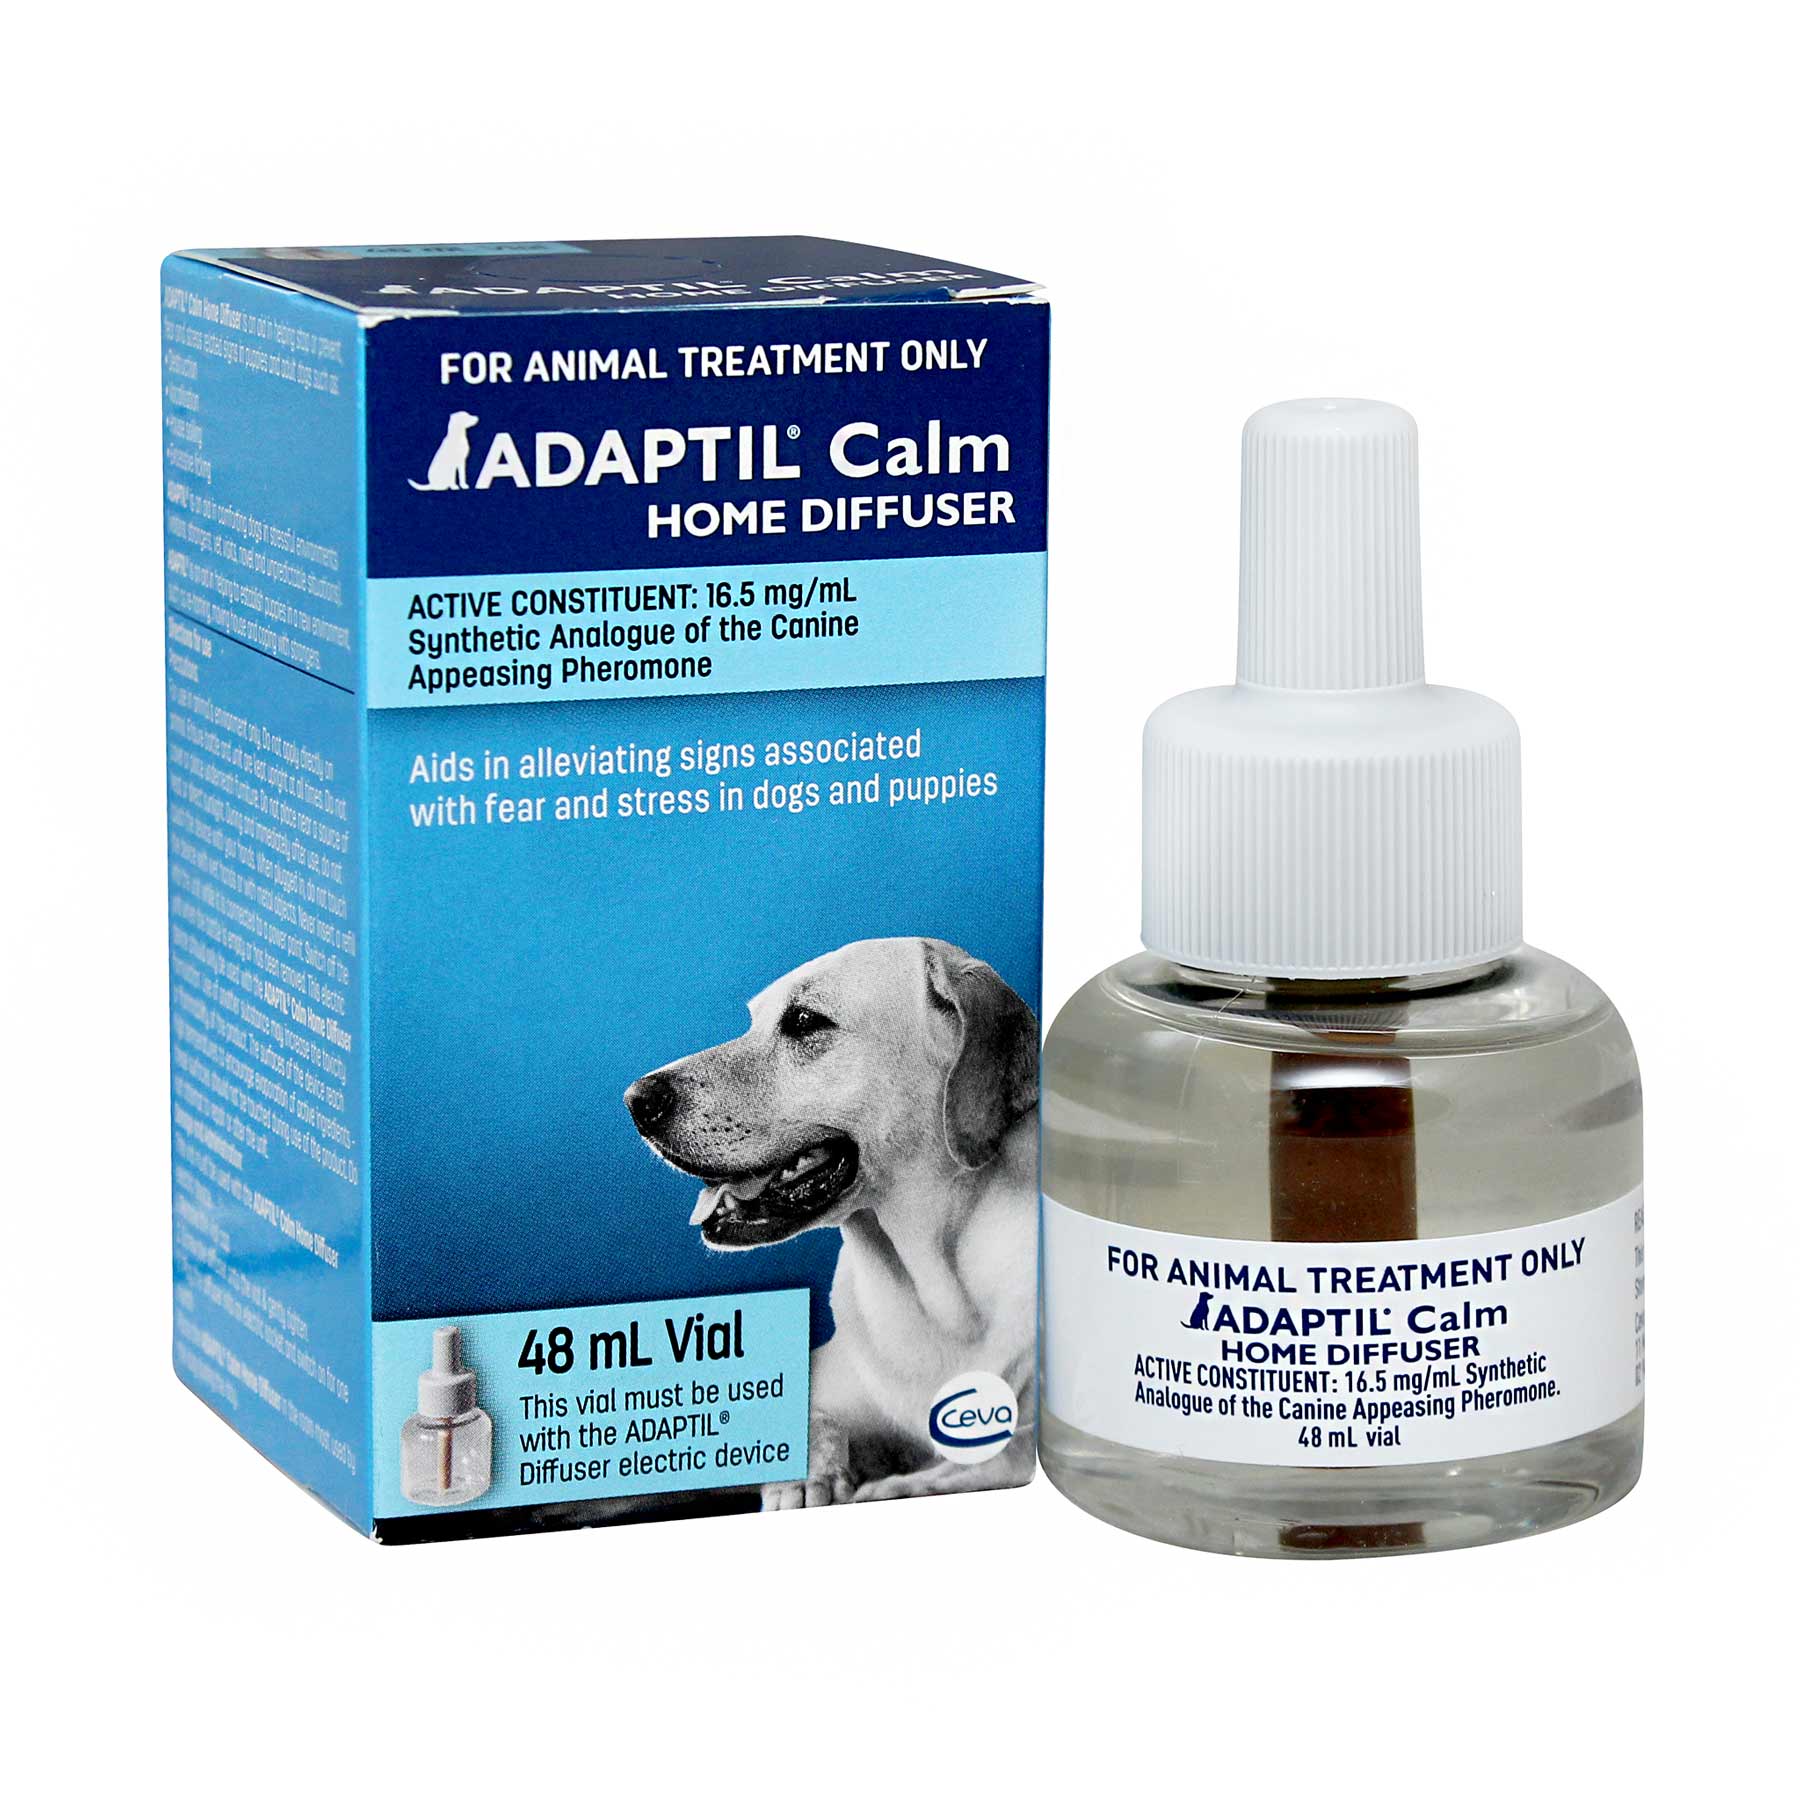 dap diffuser for dogs